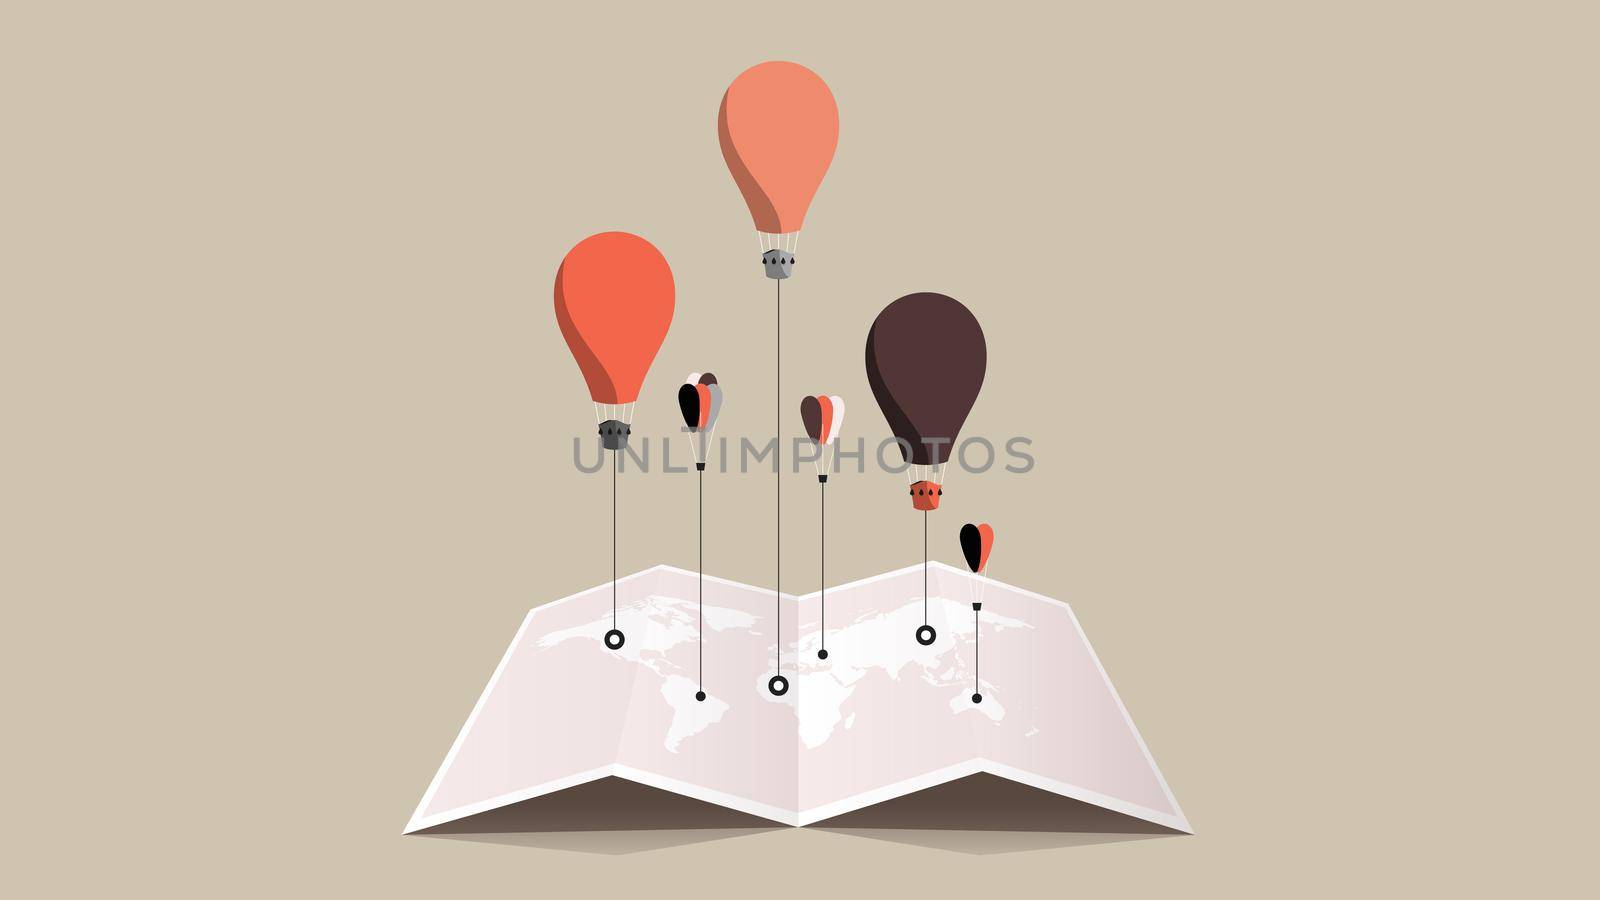 Paper Booklet With Worldmap And Colorful Balloons Over It. Flat Vector Illustration. Compare Concept.